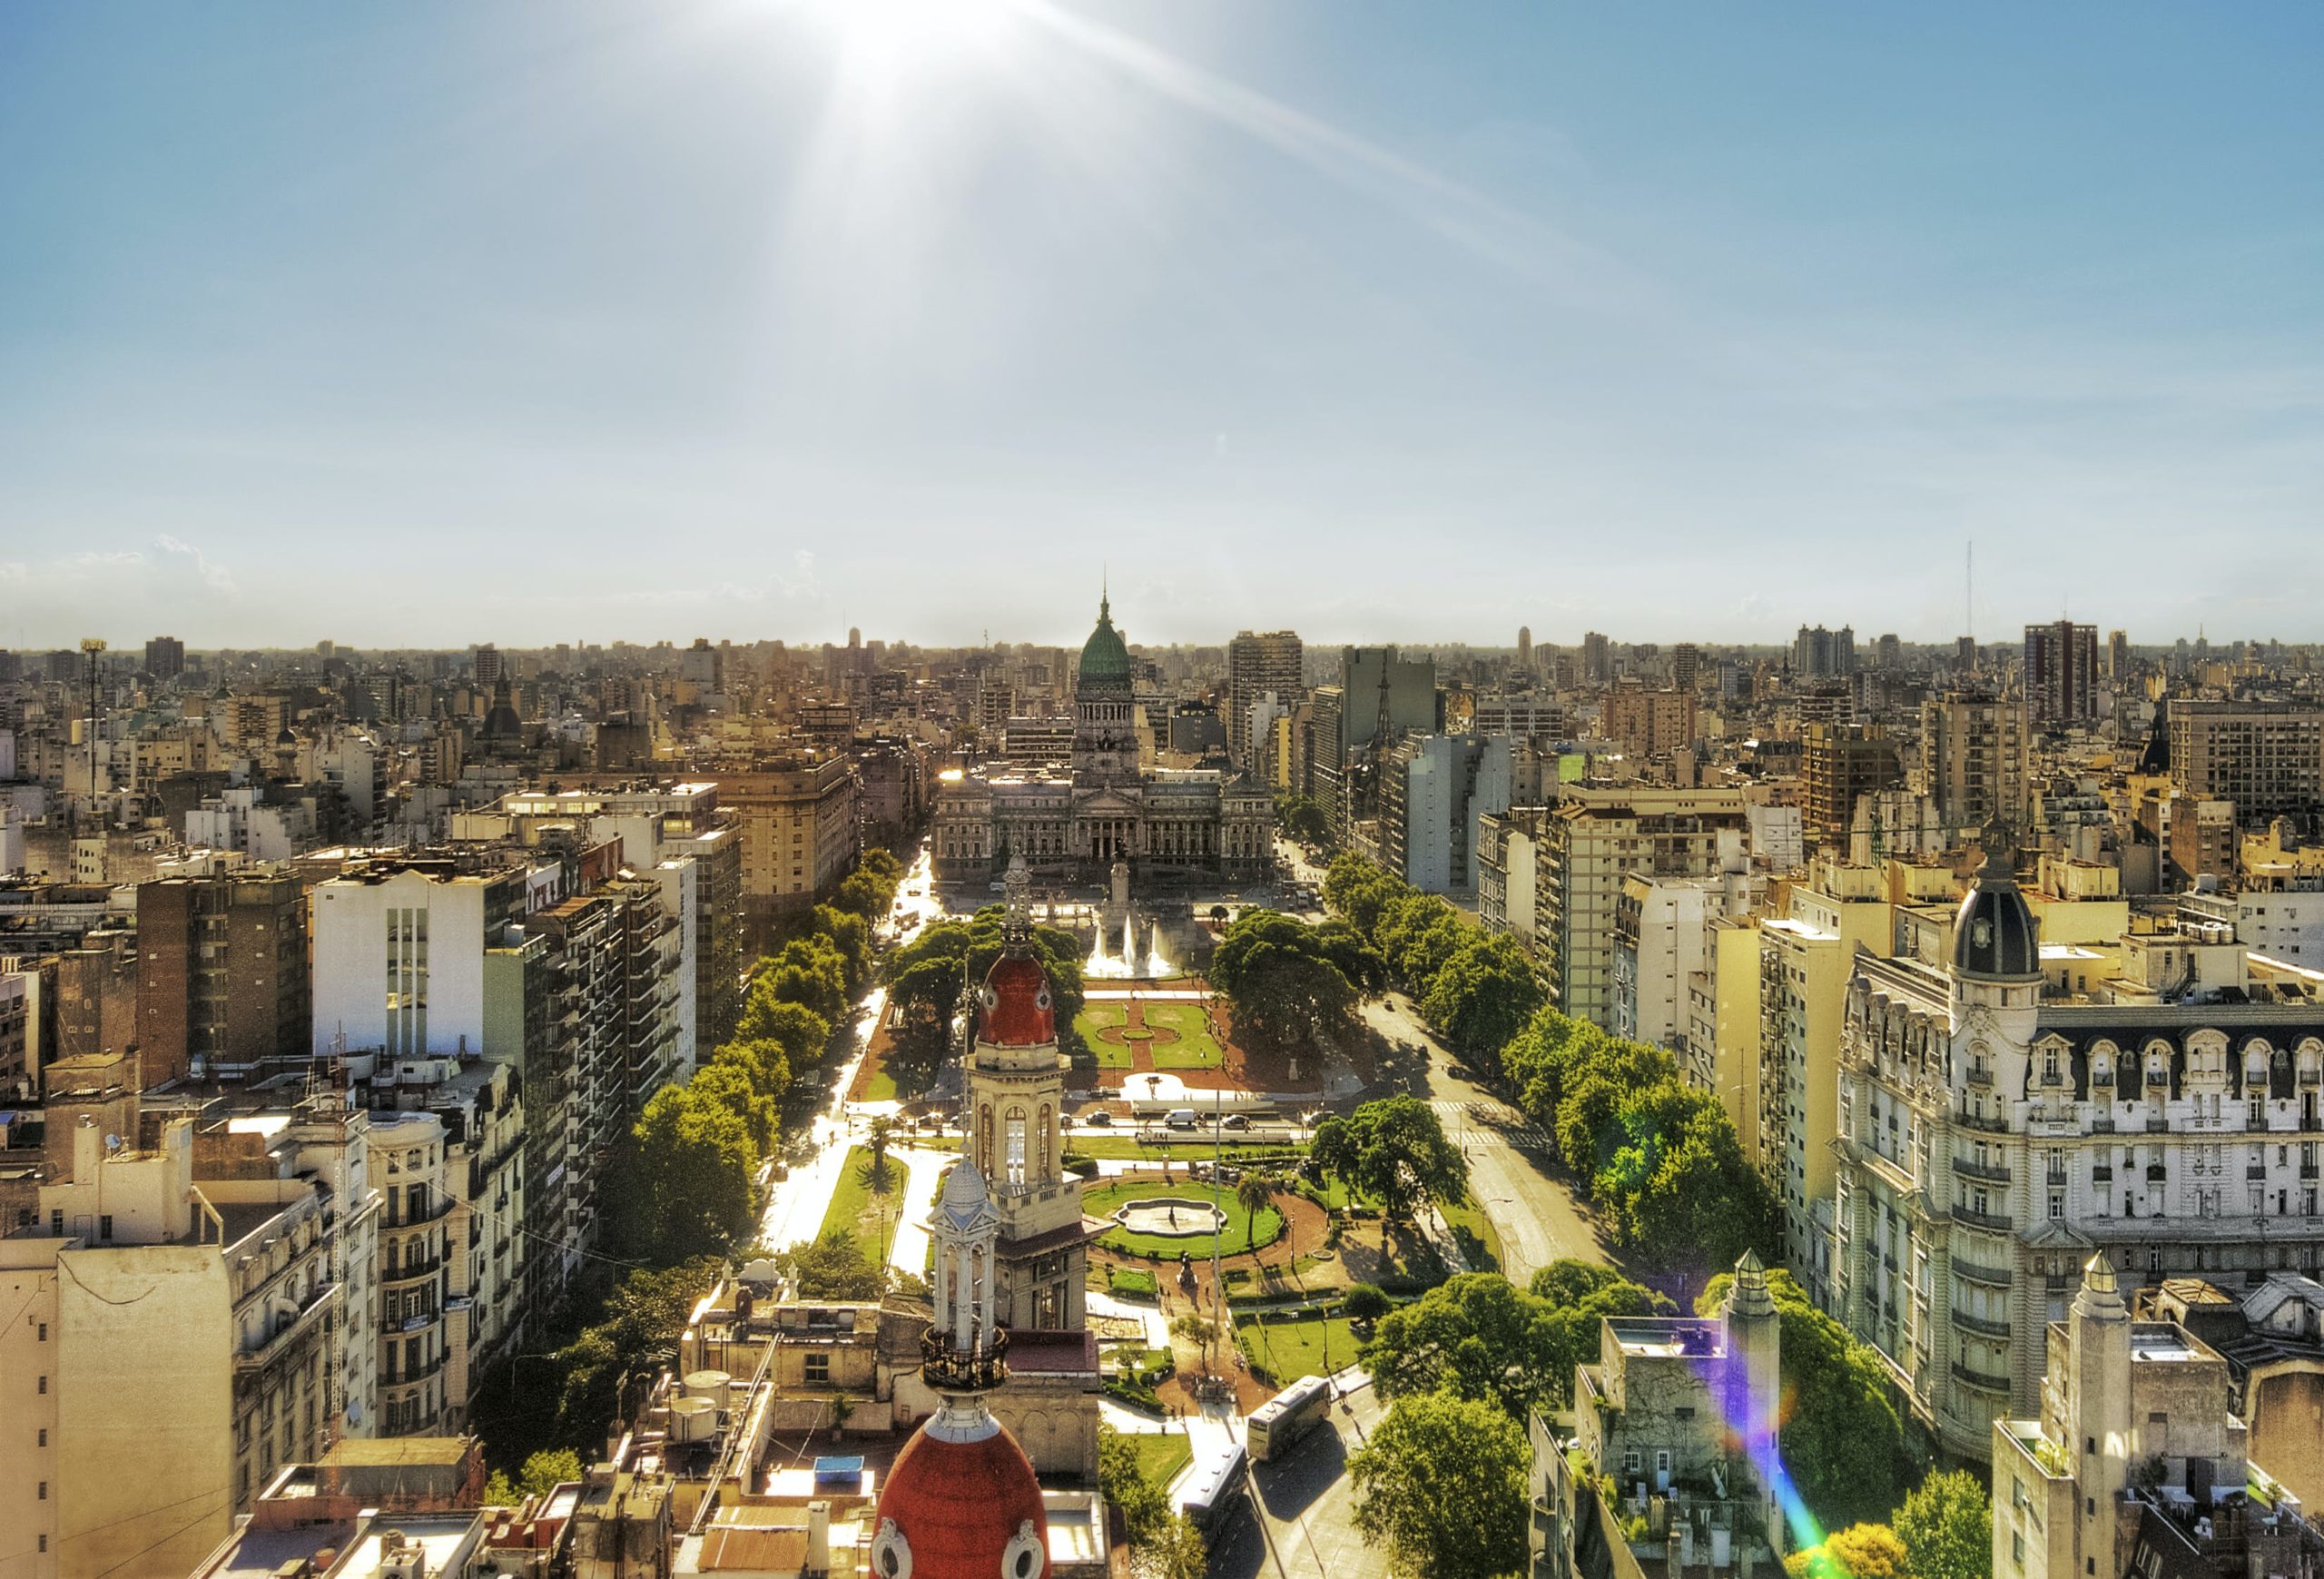 A high-level view of the city of Buenos Aires